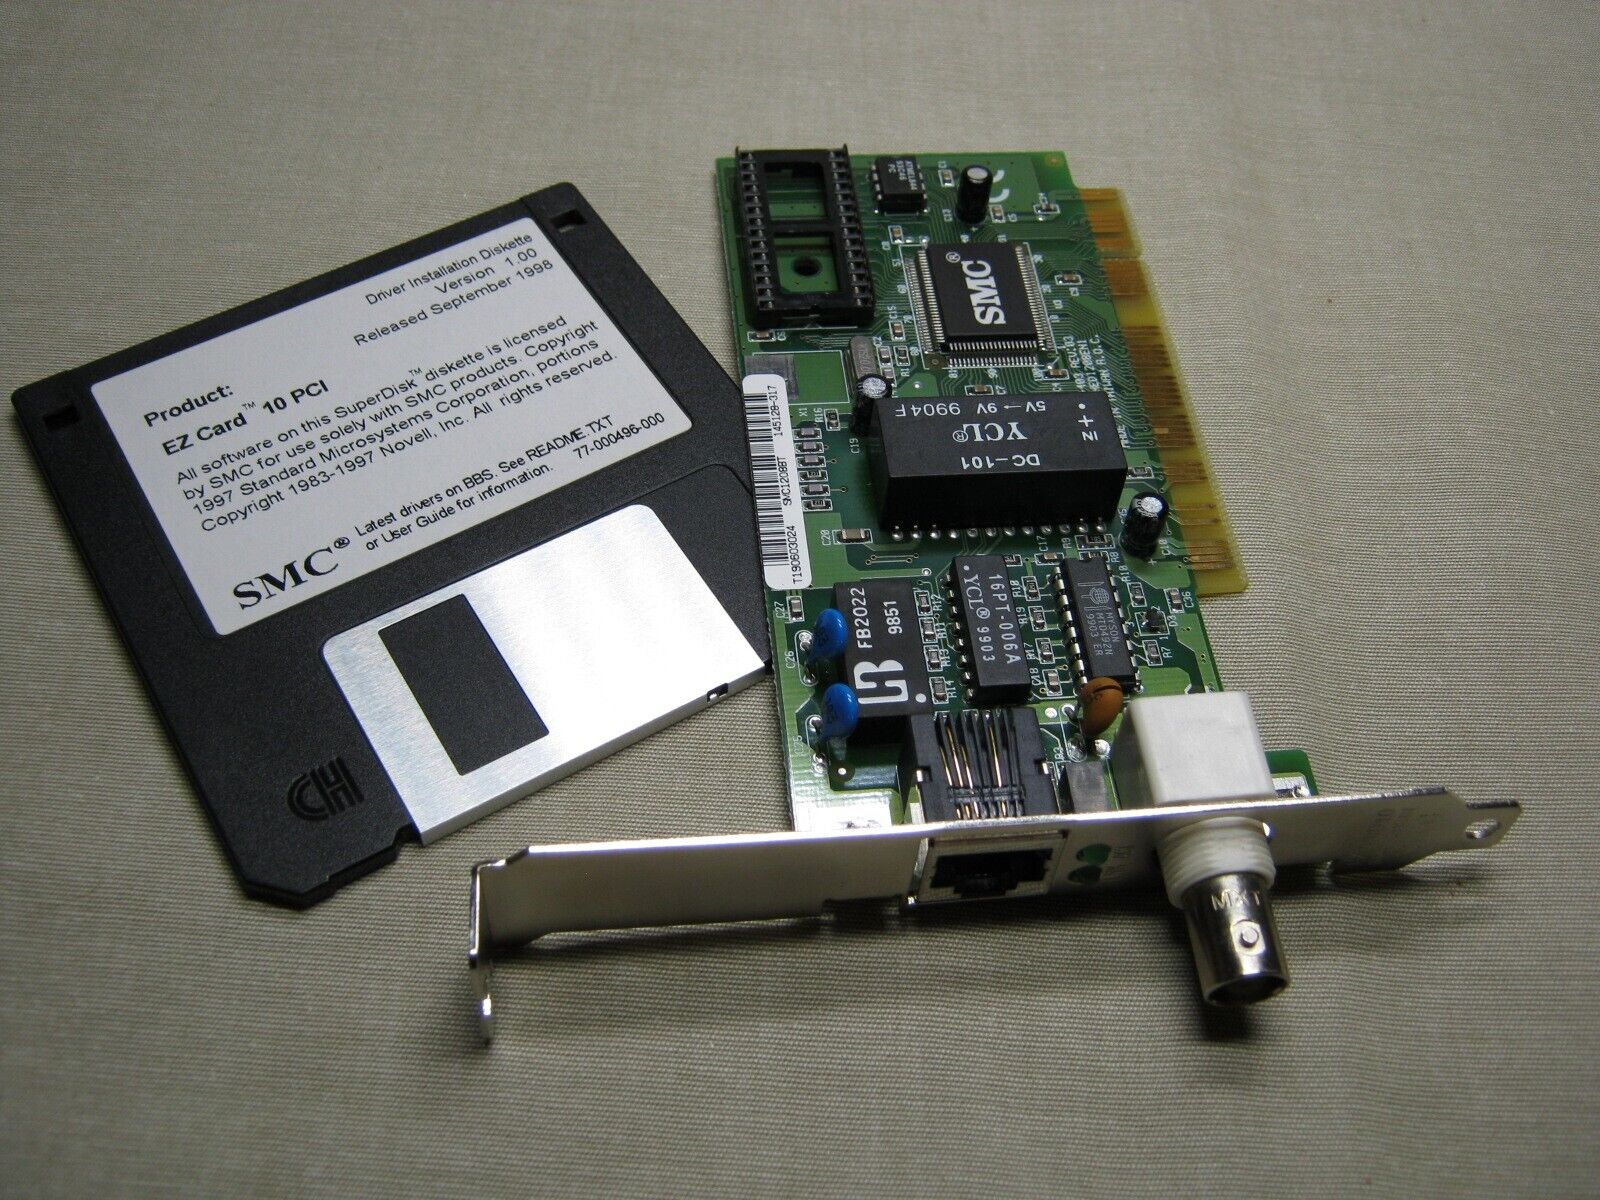 SMC12088T RJ-45 AND COAX PCI NETWORK CARD and EZ CARD 10 PCI DRIVER  FLOPPY